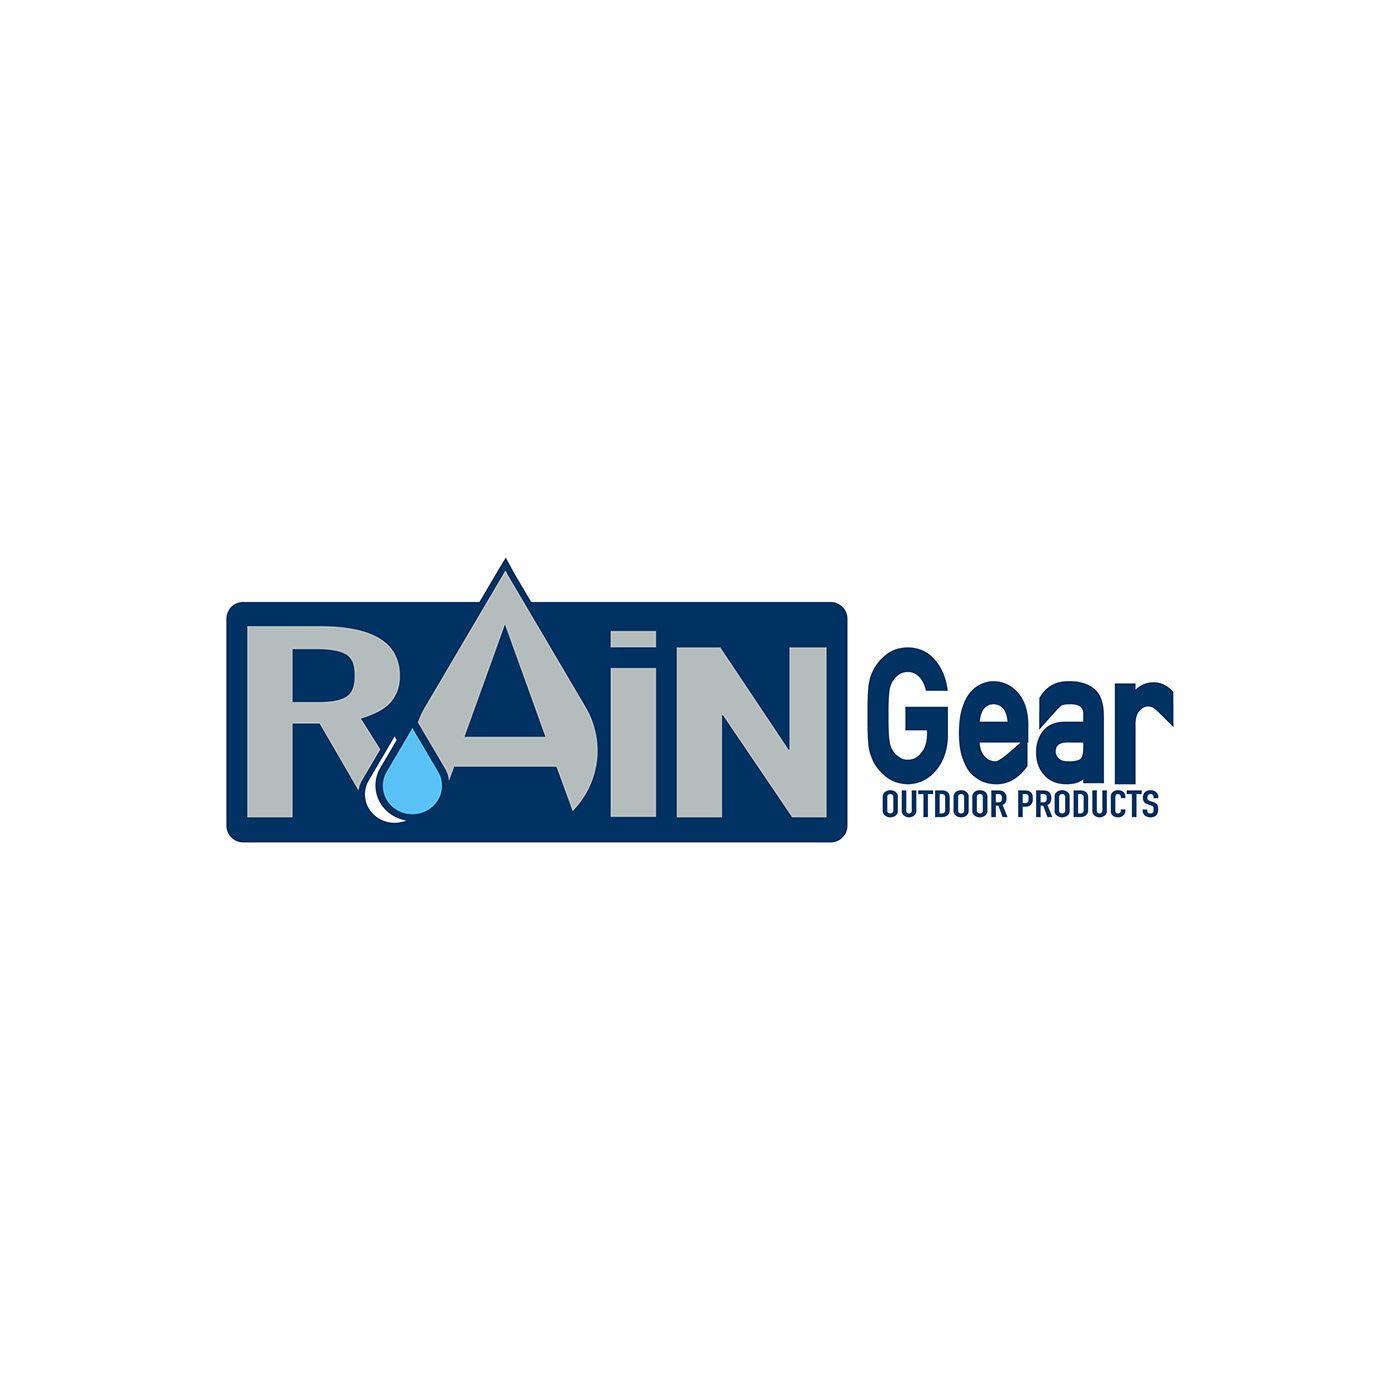 Outdoor Products Logo - RAIN GEAR Outdoor Products on Behance